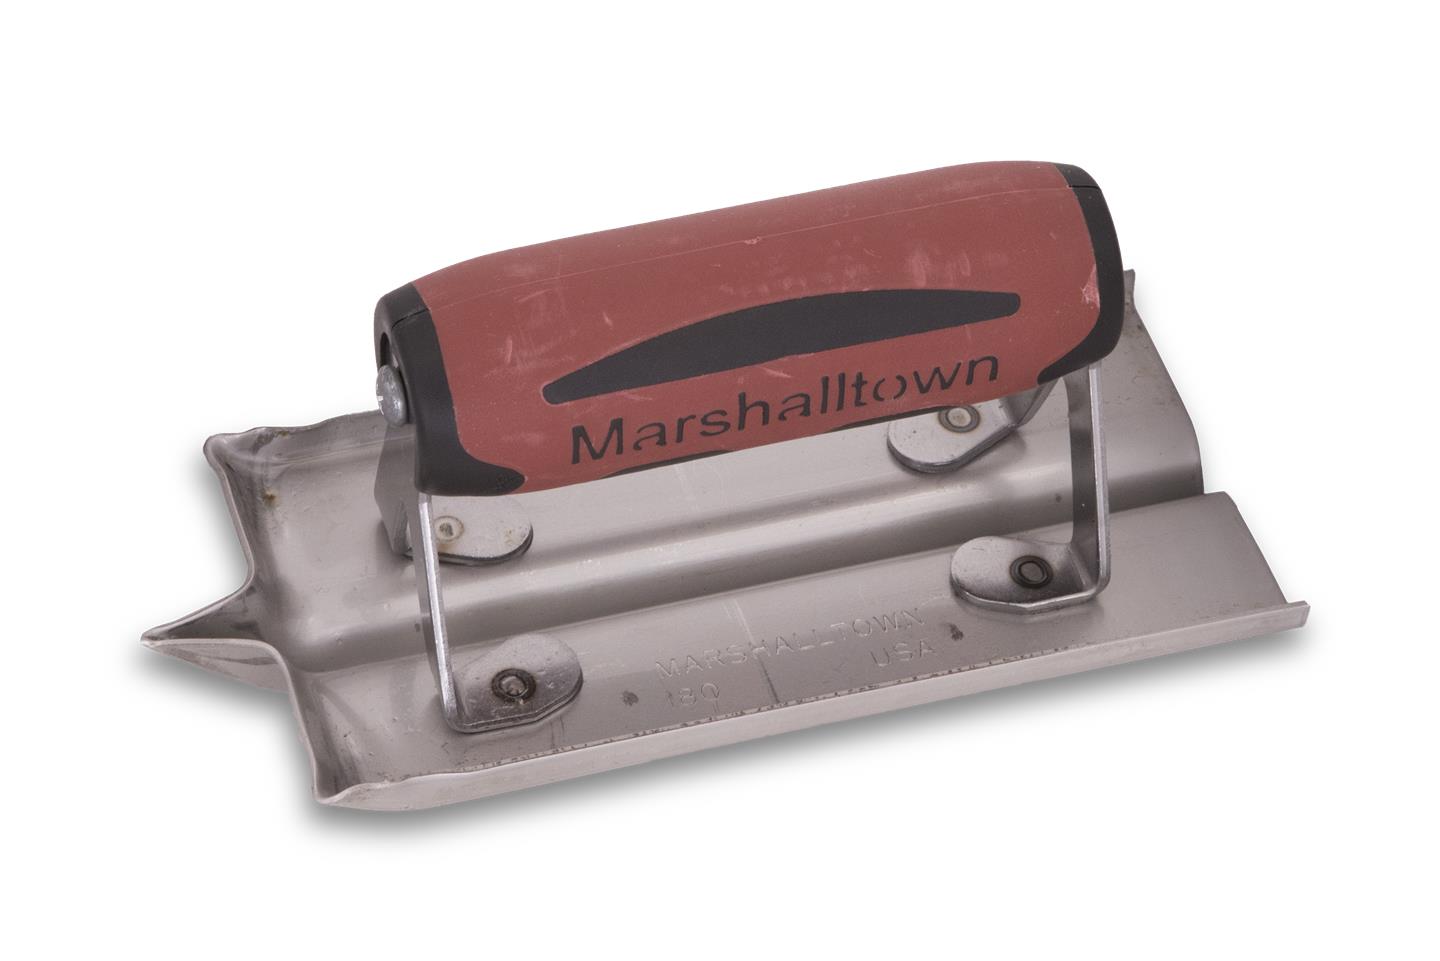 Marshalltown 14102 6 X 3 Stainless Steel Groover-1-2 X 1-2 Groove-DS Handle